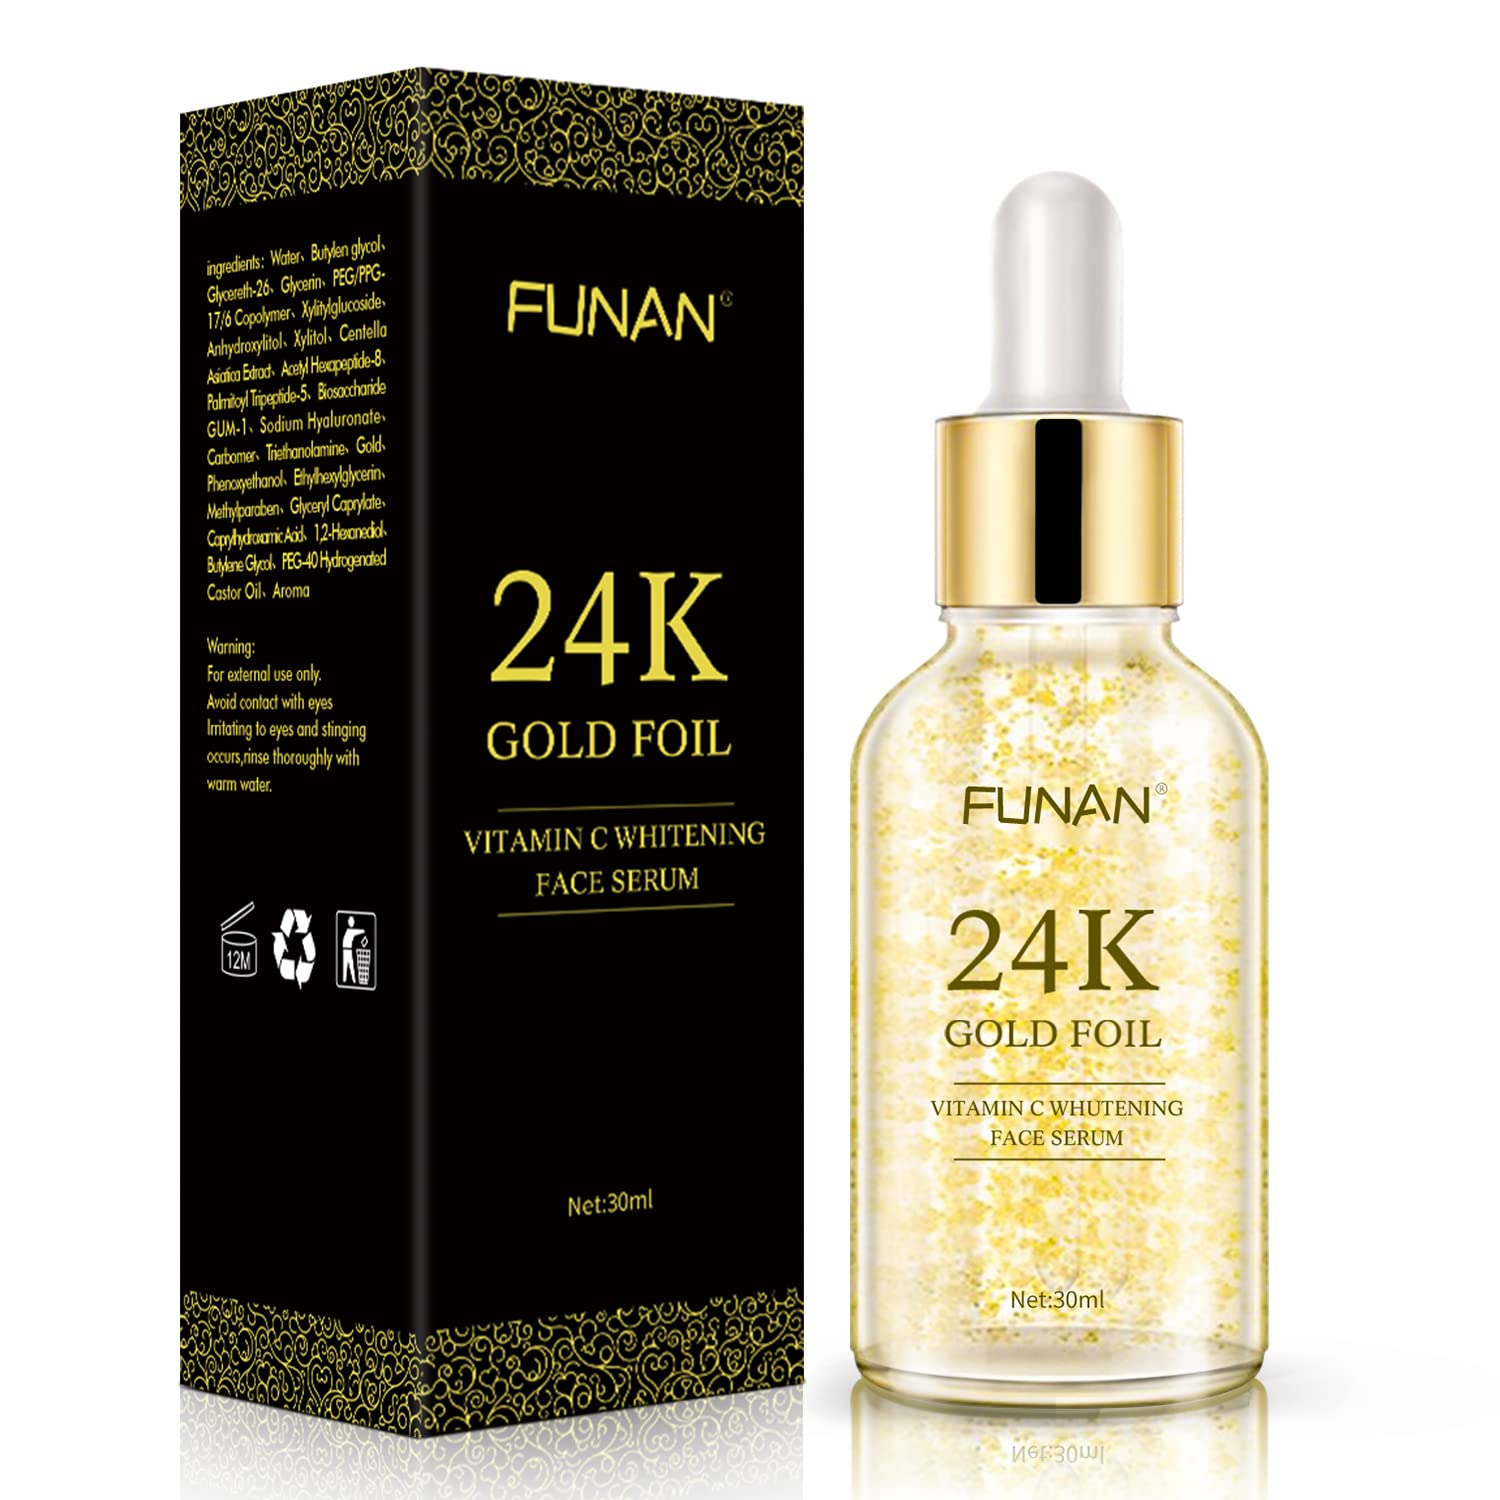 24K Under Eye Mask Puffy Eyes & Dark,24K Gold Face Serum Topical Facial Serum with Vitamin C and Hyaluronic Acid